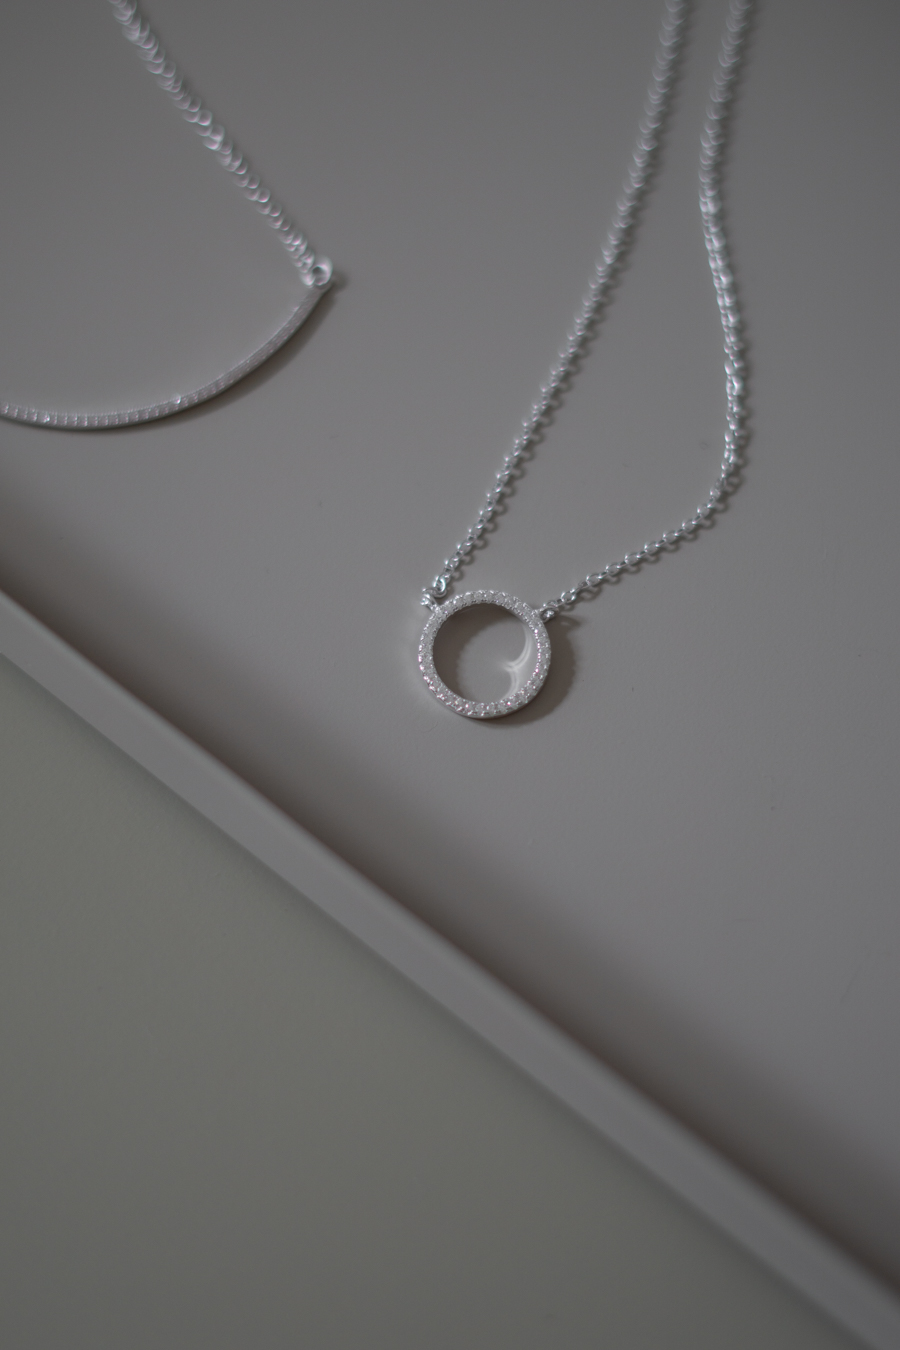 Cooee Design Silver Circle Necklace, Elegant Minimalist Jewelry, Timeless Style